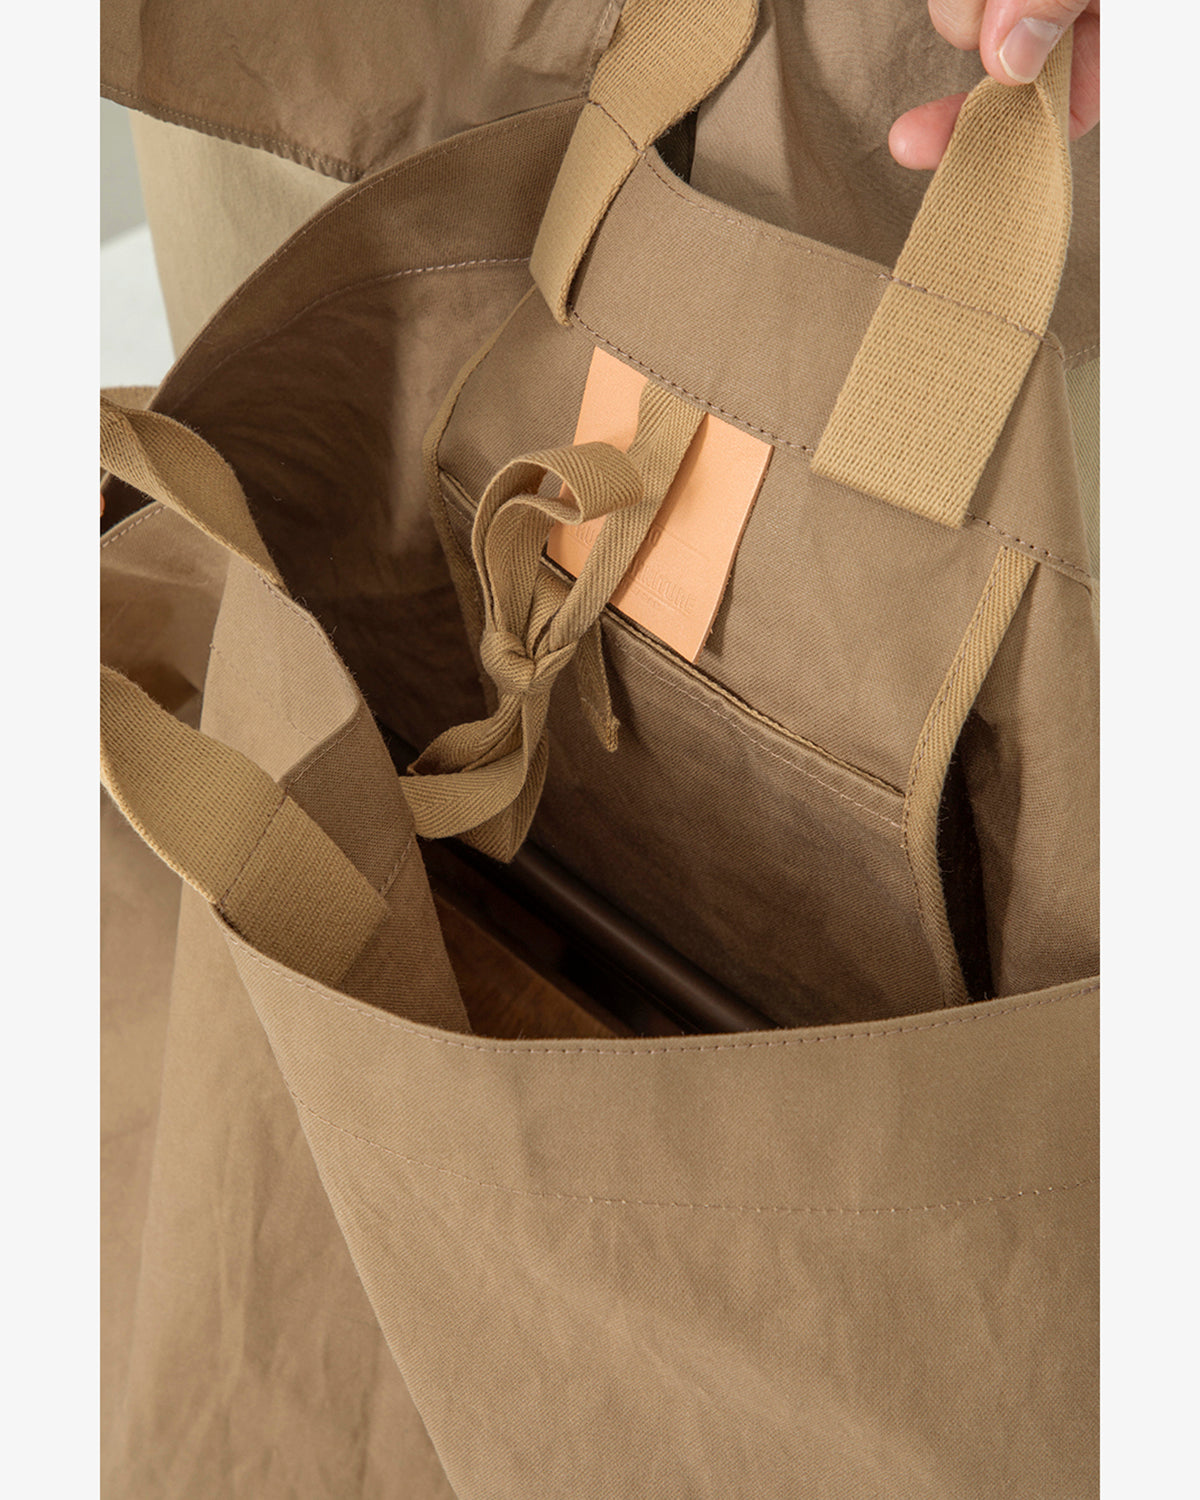 × TRUCK FURNITURE COTTON CANVAS GIANT TOTE BAG